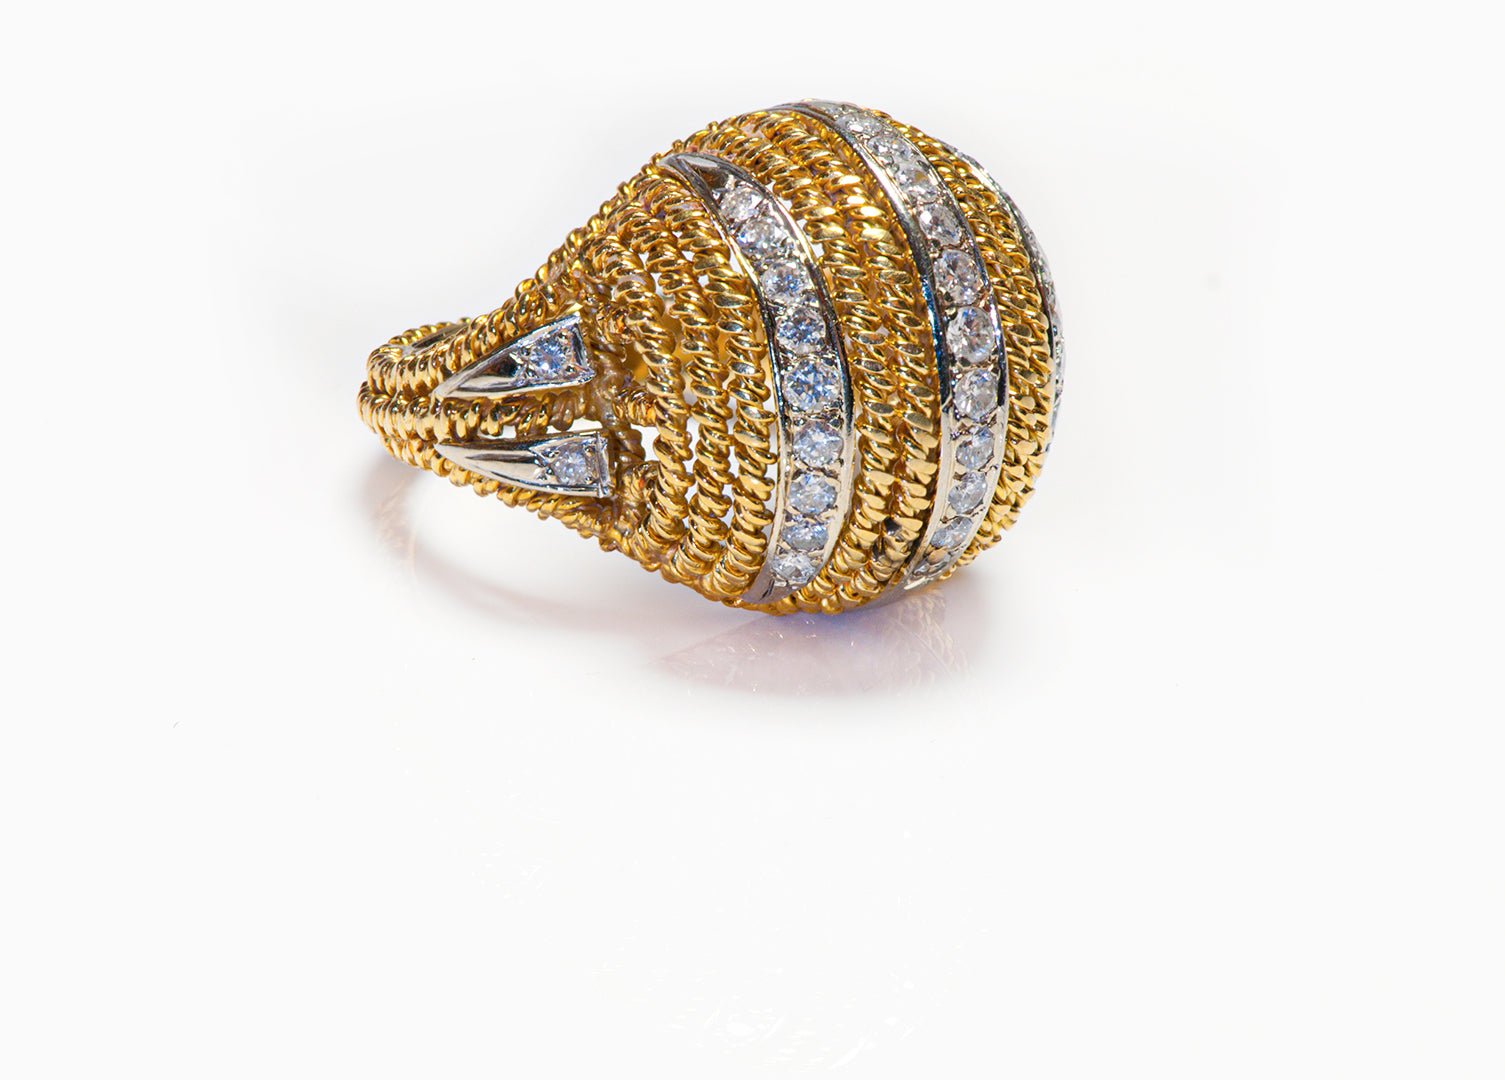 Corletto 18K Gold Twisted Rope Dome Diamond Ring - DSF Antique Jewelry